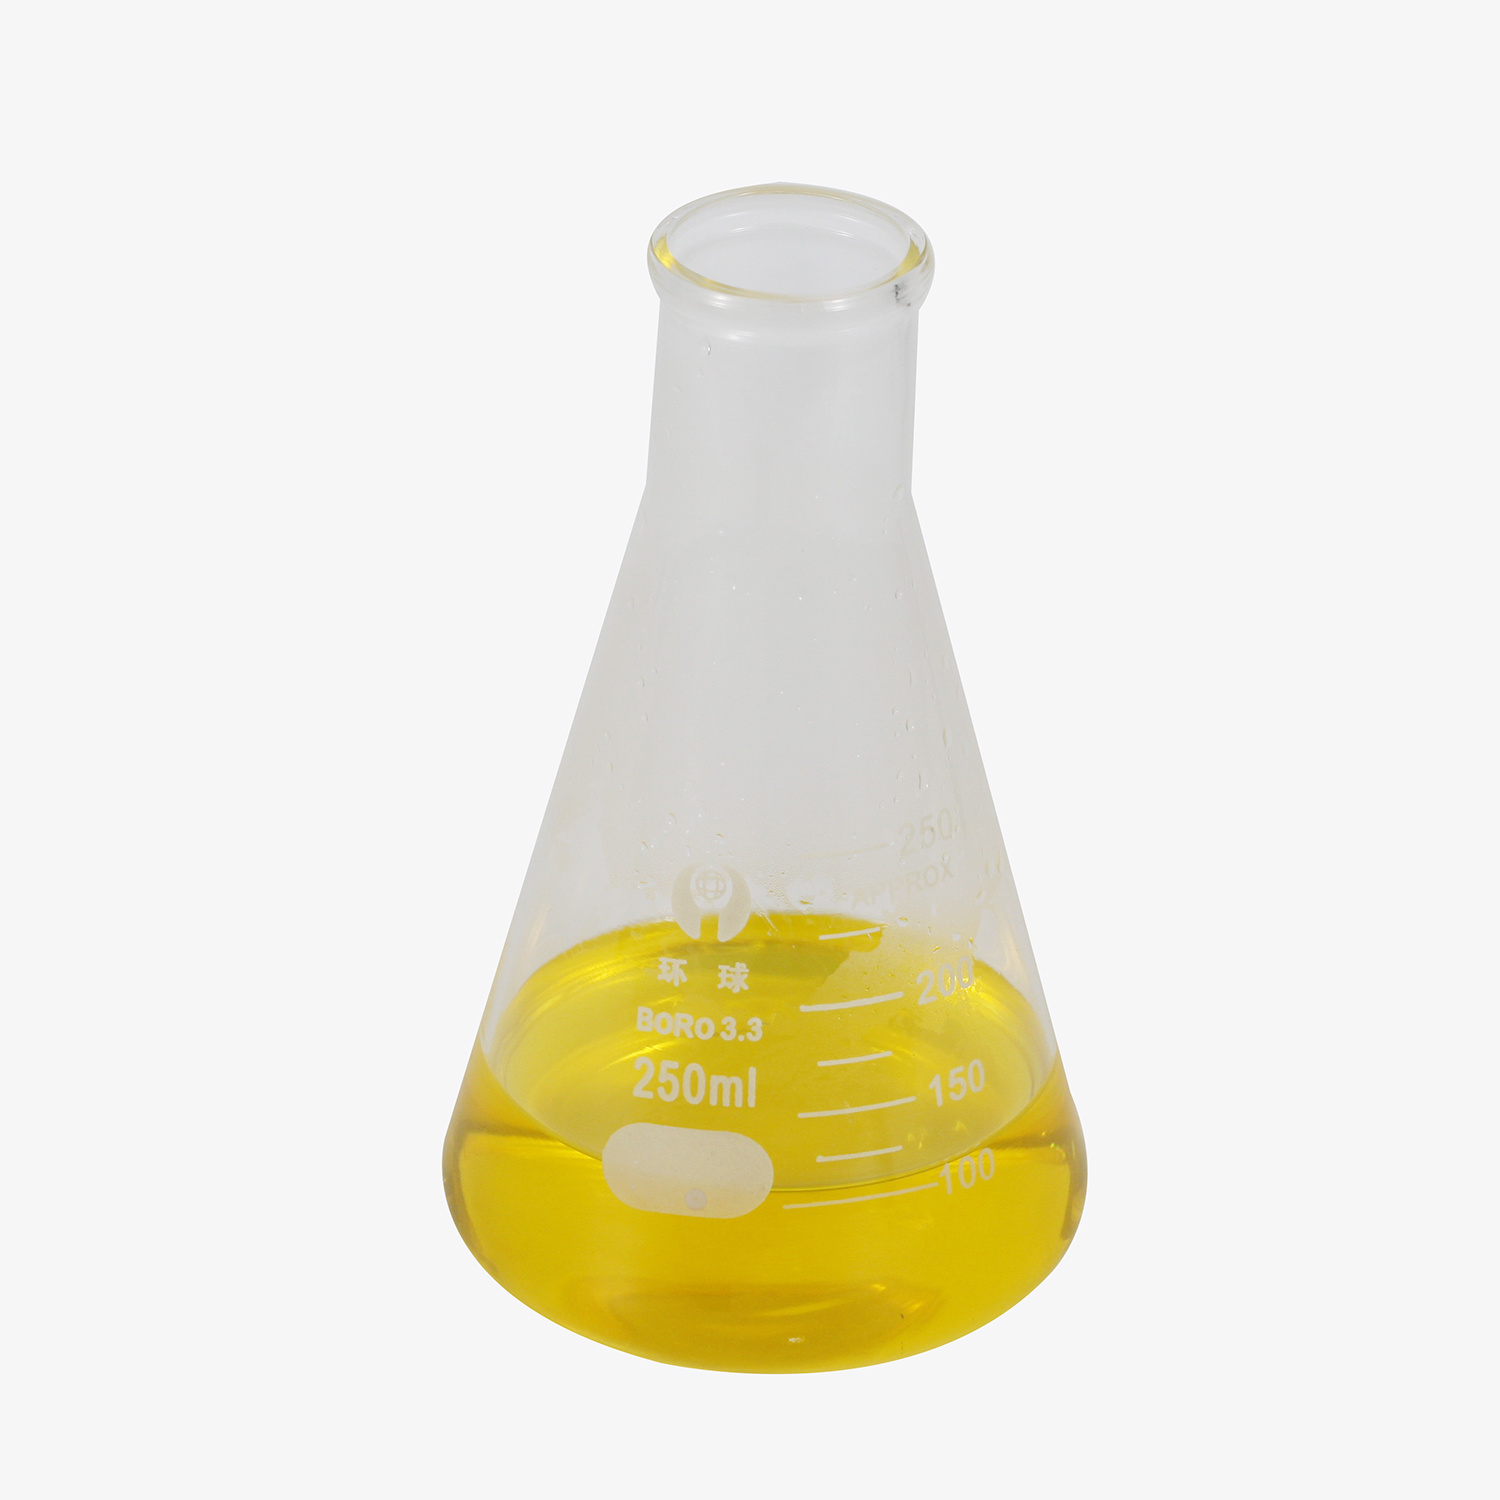 NEW Pmk Oil Cas 28578-16-7 PMK Ethyl Glycidate Safe Delivery To Each Country